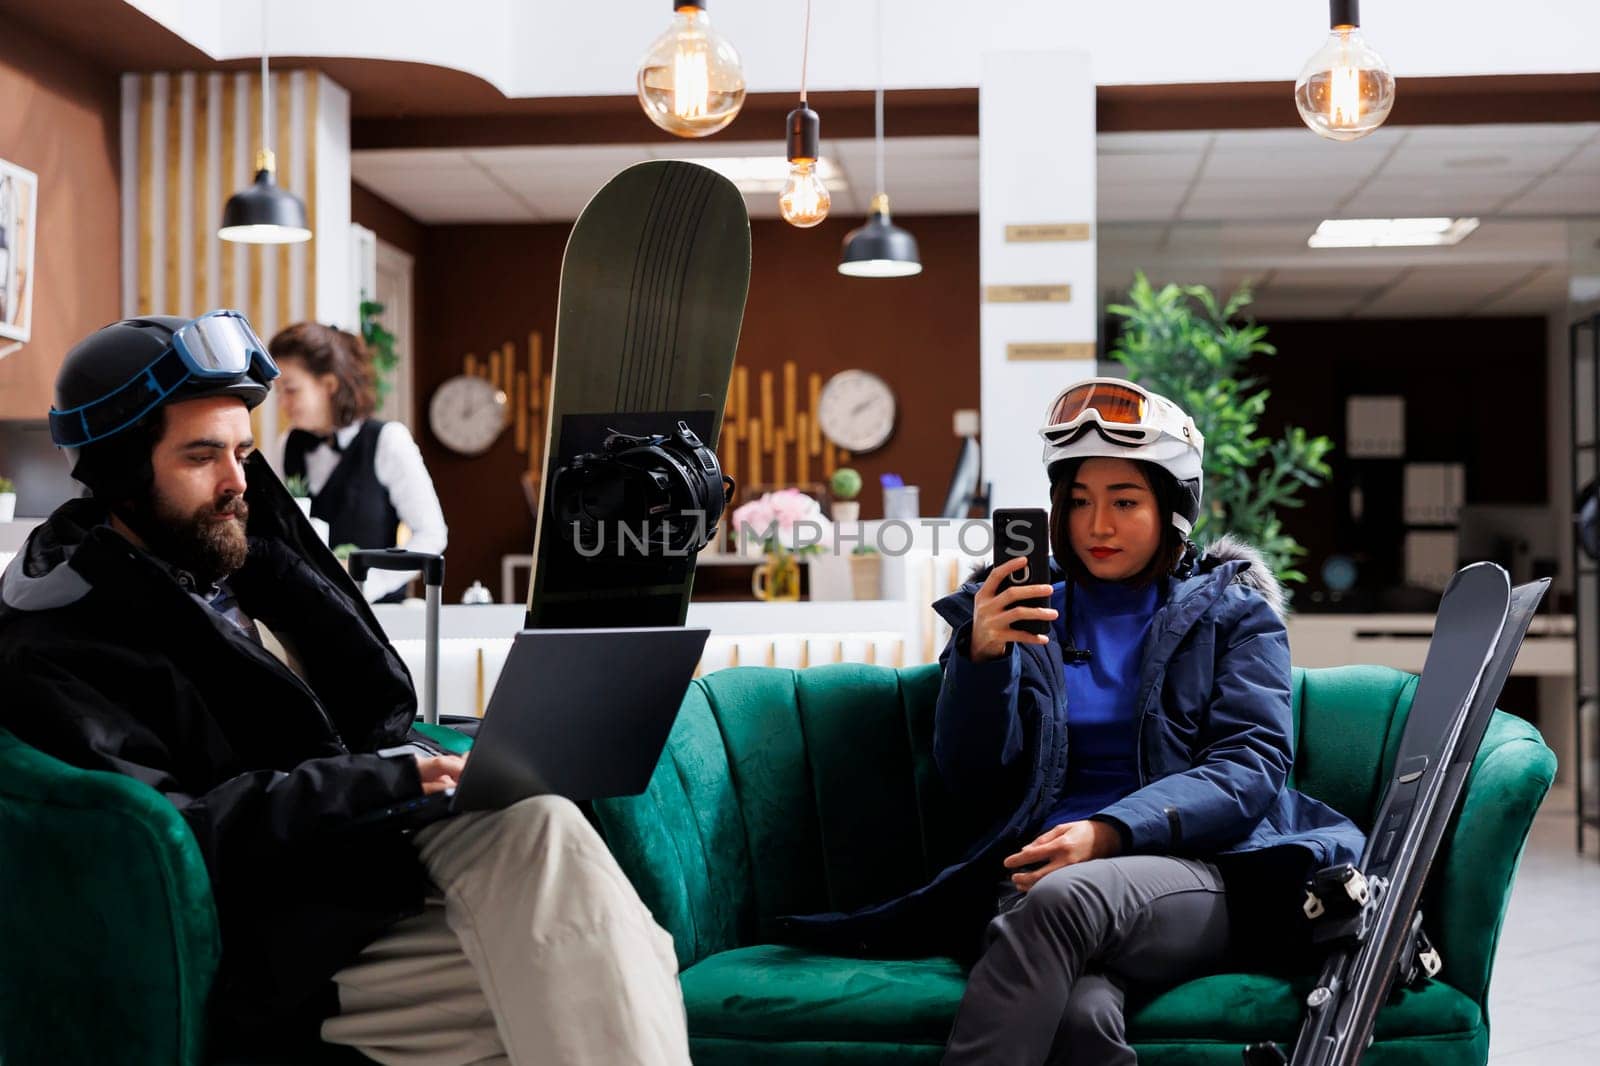 Young couple enjoys winter vacation by lounging in the ski resort lounge area with their digital gadgets. A man with a laptop and a lady with smartphone take a break from skiing and snowboarding.